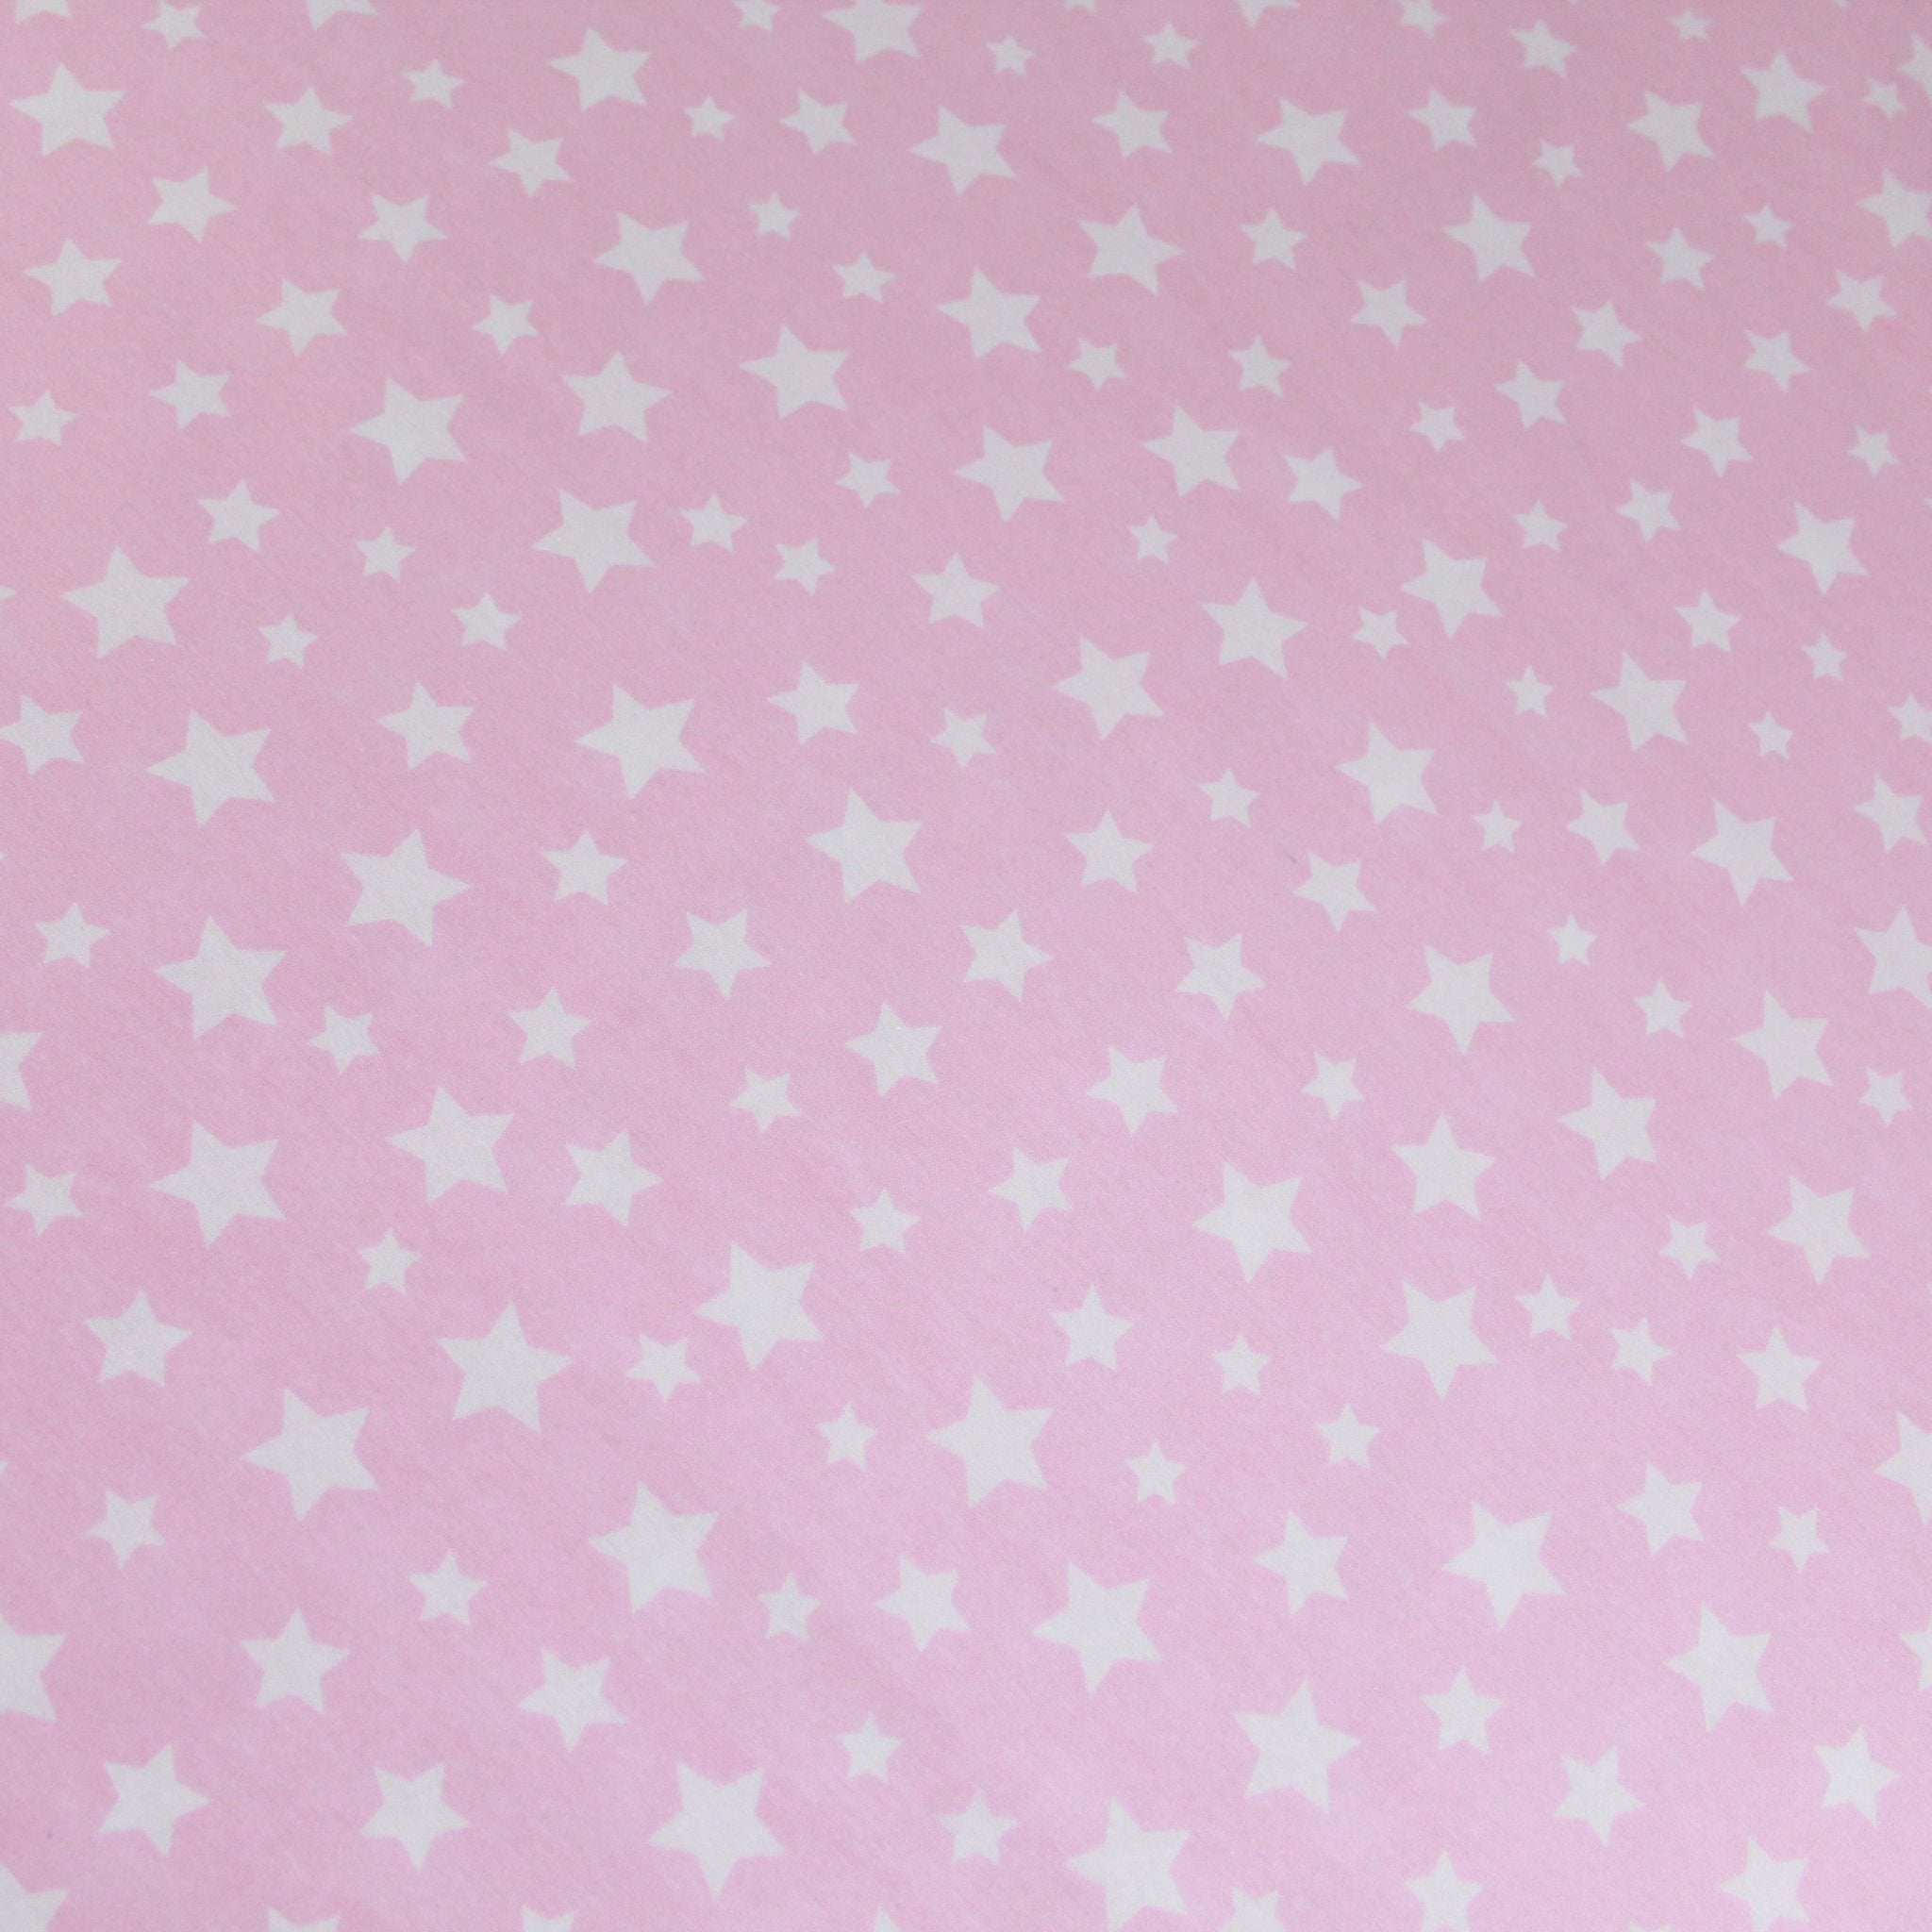 Premium Quality Super Wide Cotton Blend Sheeting "Little White Stars" 94" Wide Pink - Pound A Metre